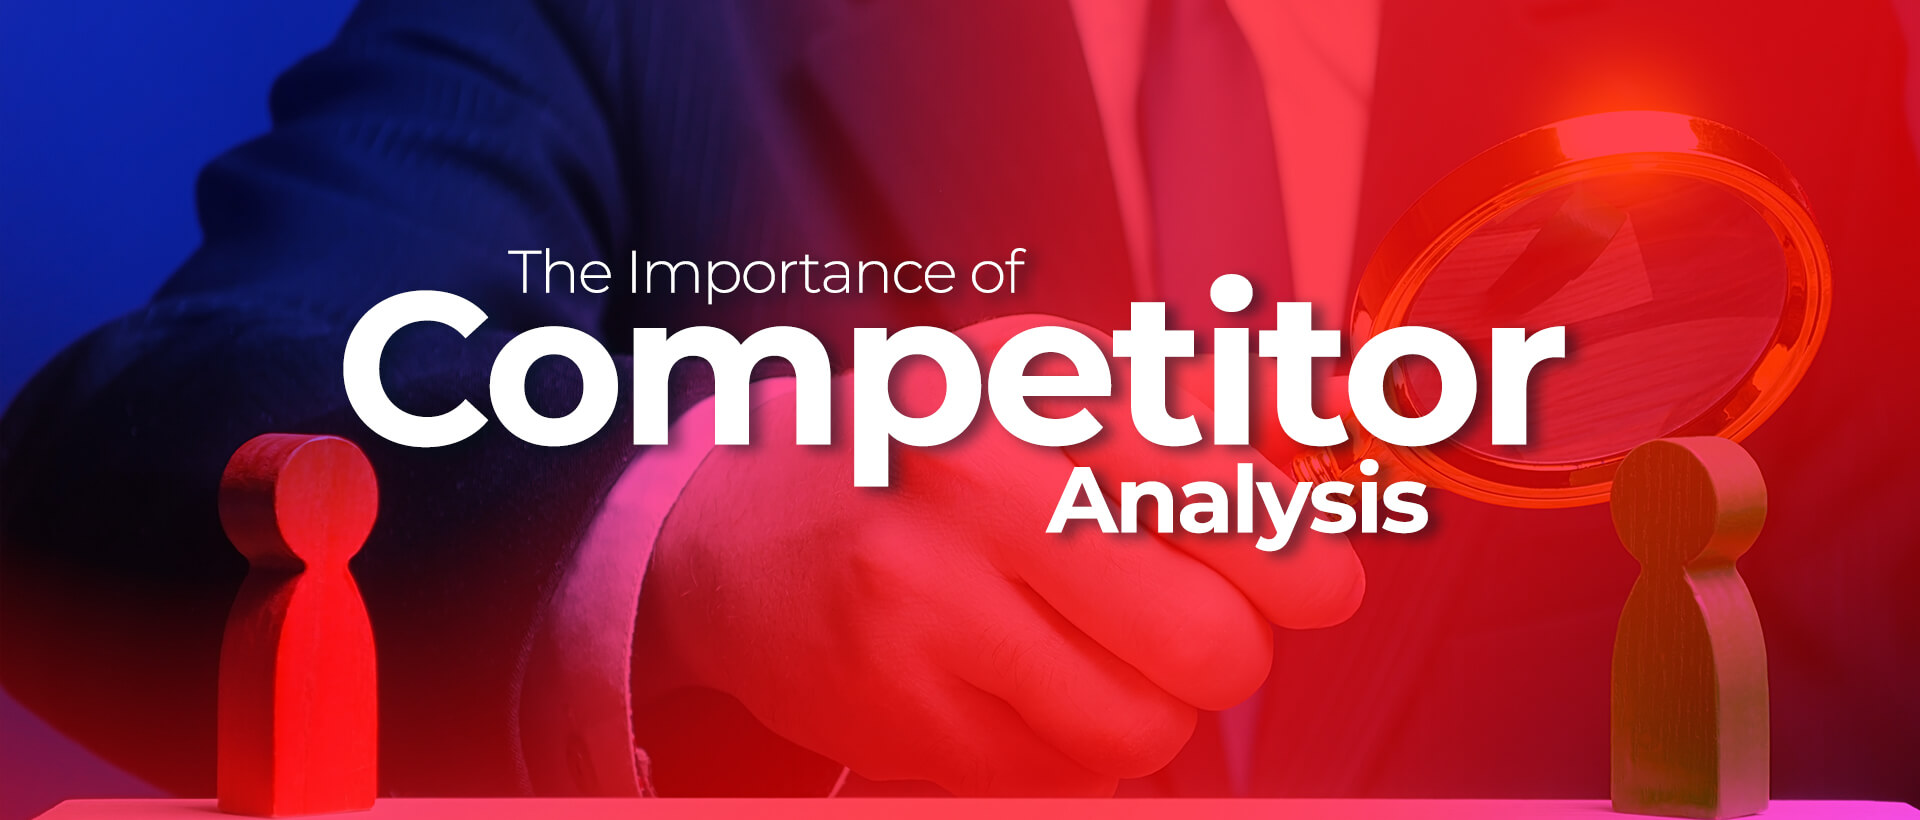 The Importance of Competitor Analysis